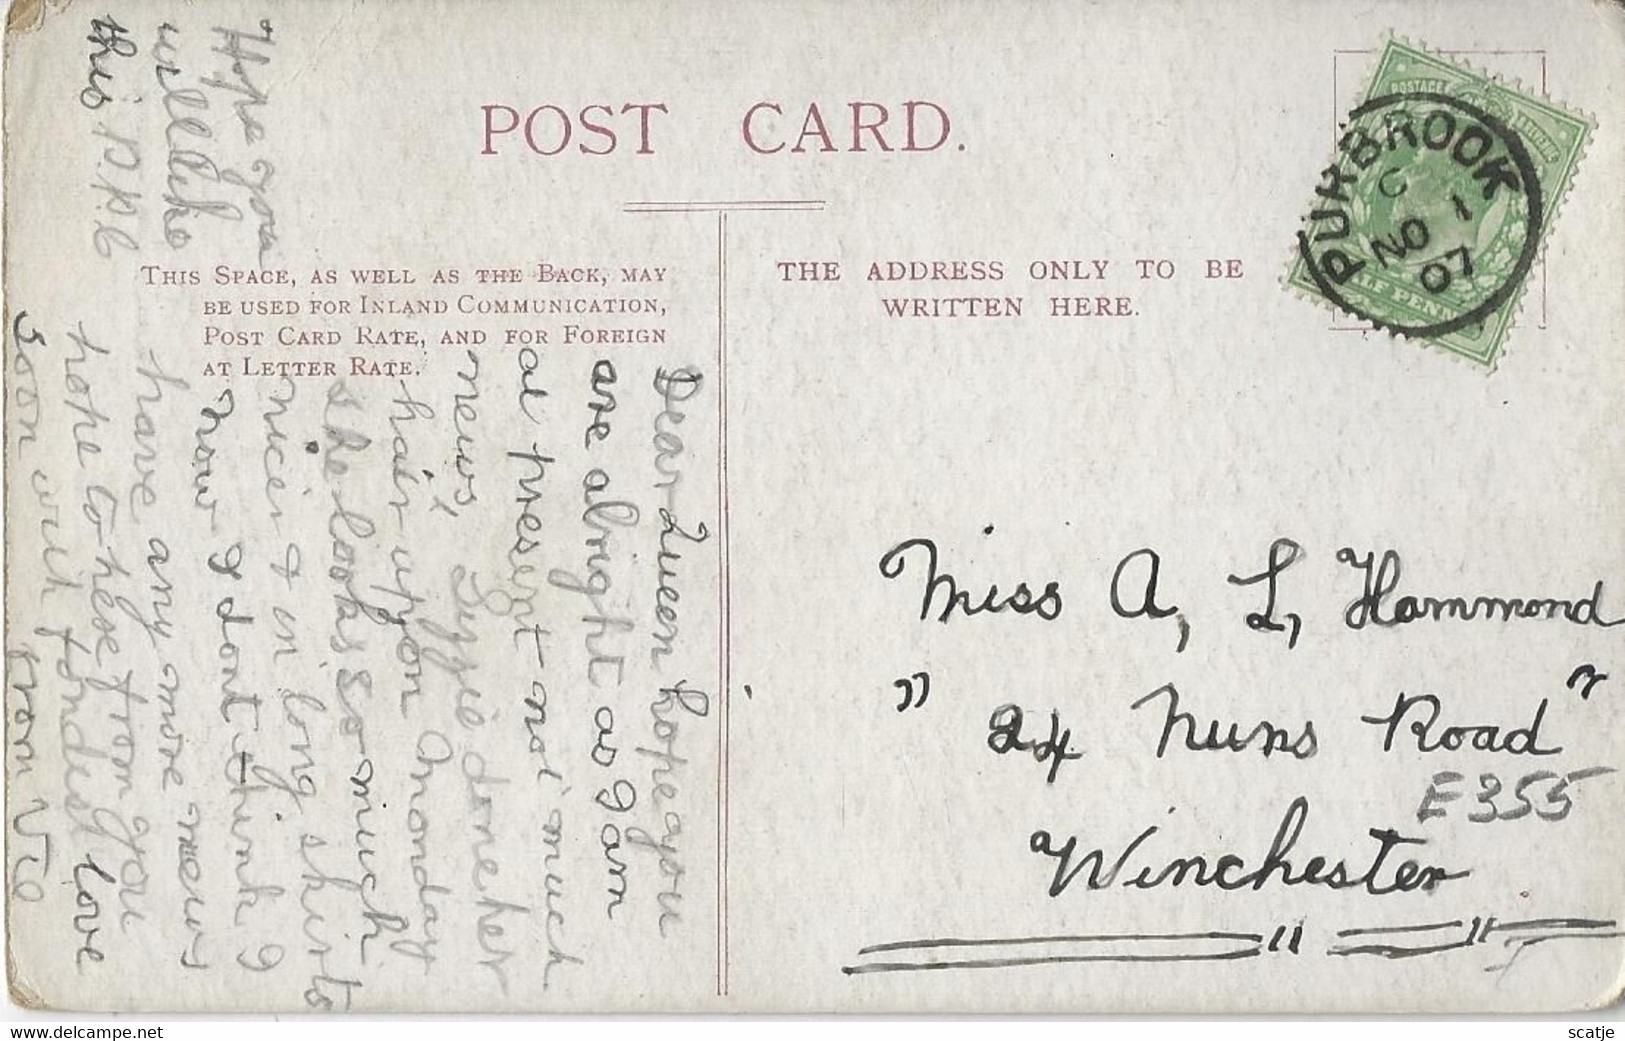 Pistyll-Y-Cain Falls   -   1907   Purbrook    Naar   Winchester - Merionethshire